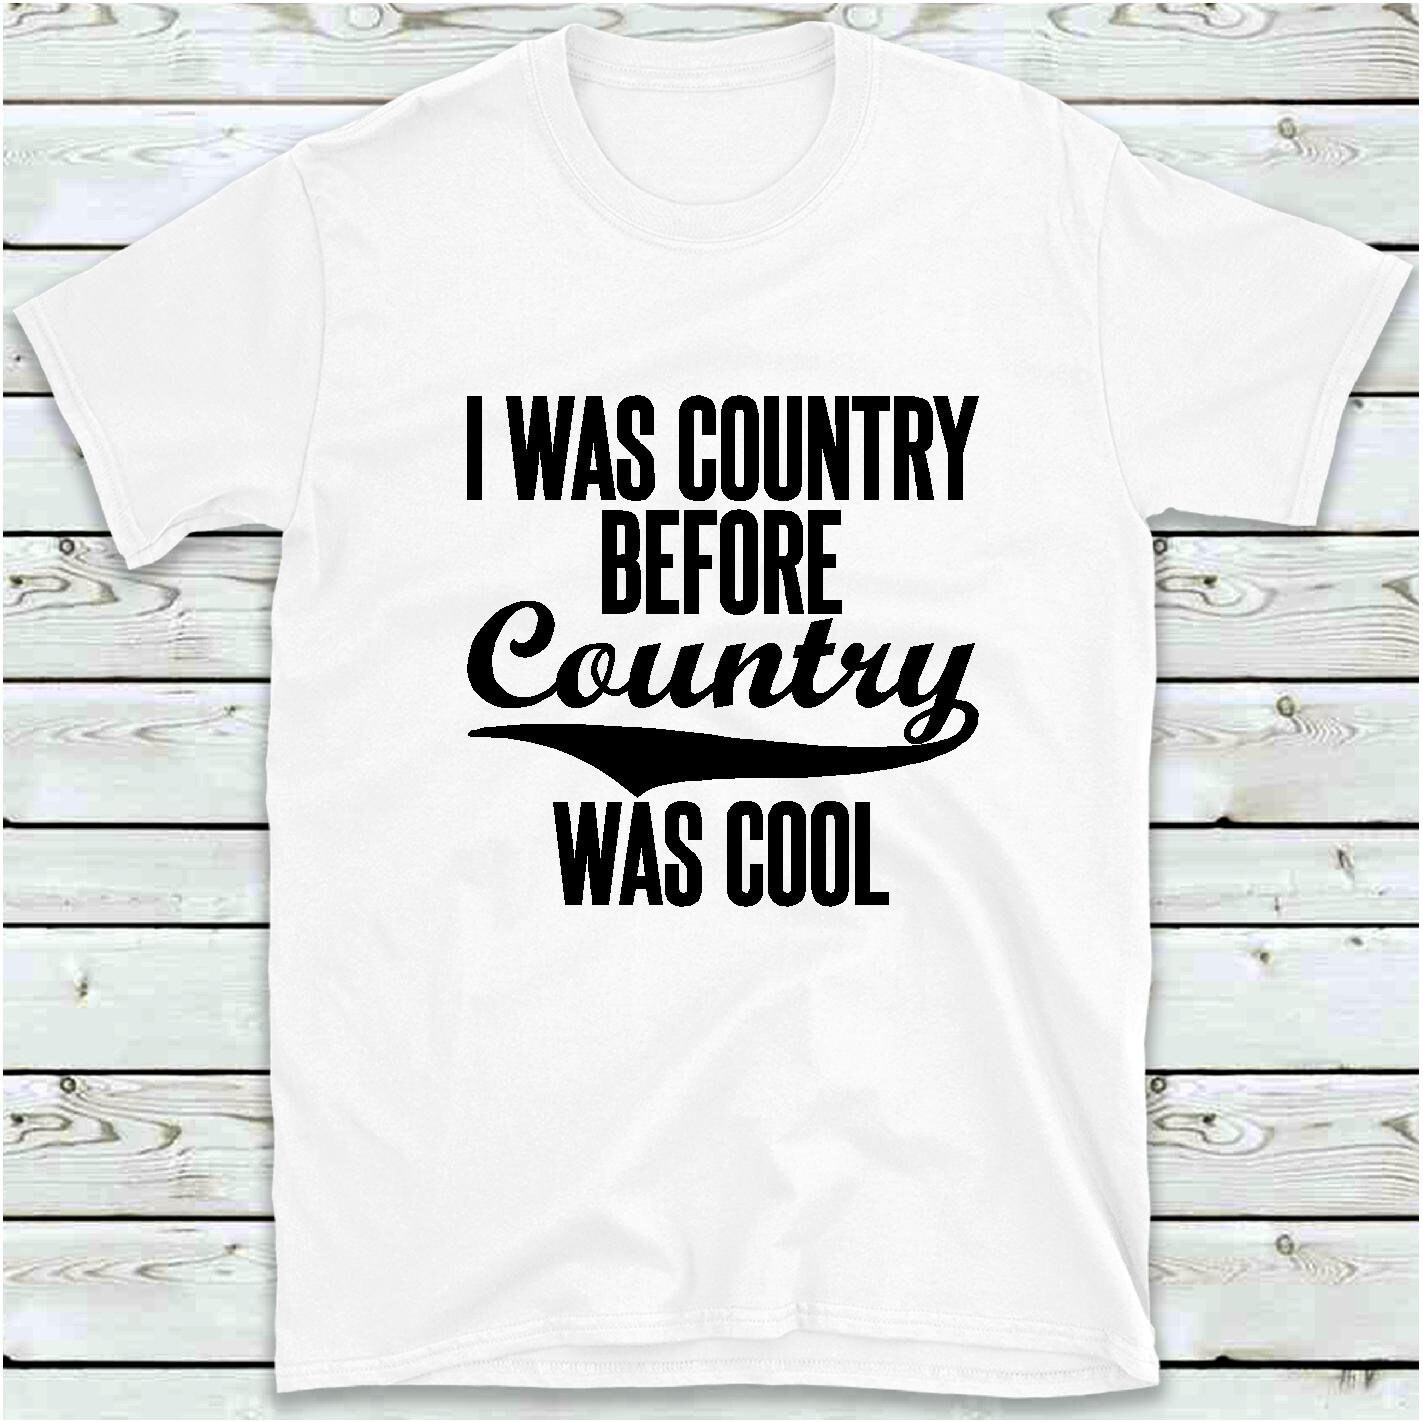 Country Music Shirt I Was Country Before Country Was Cool T | Etsy